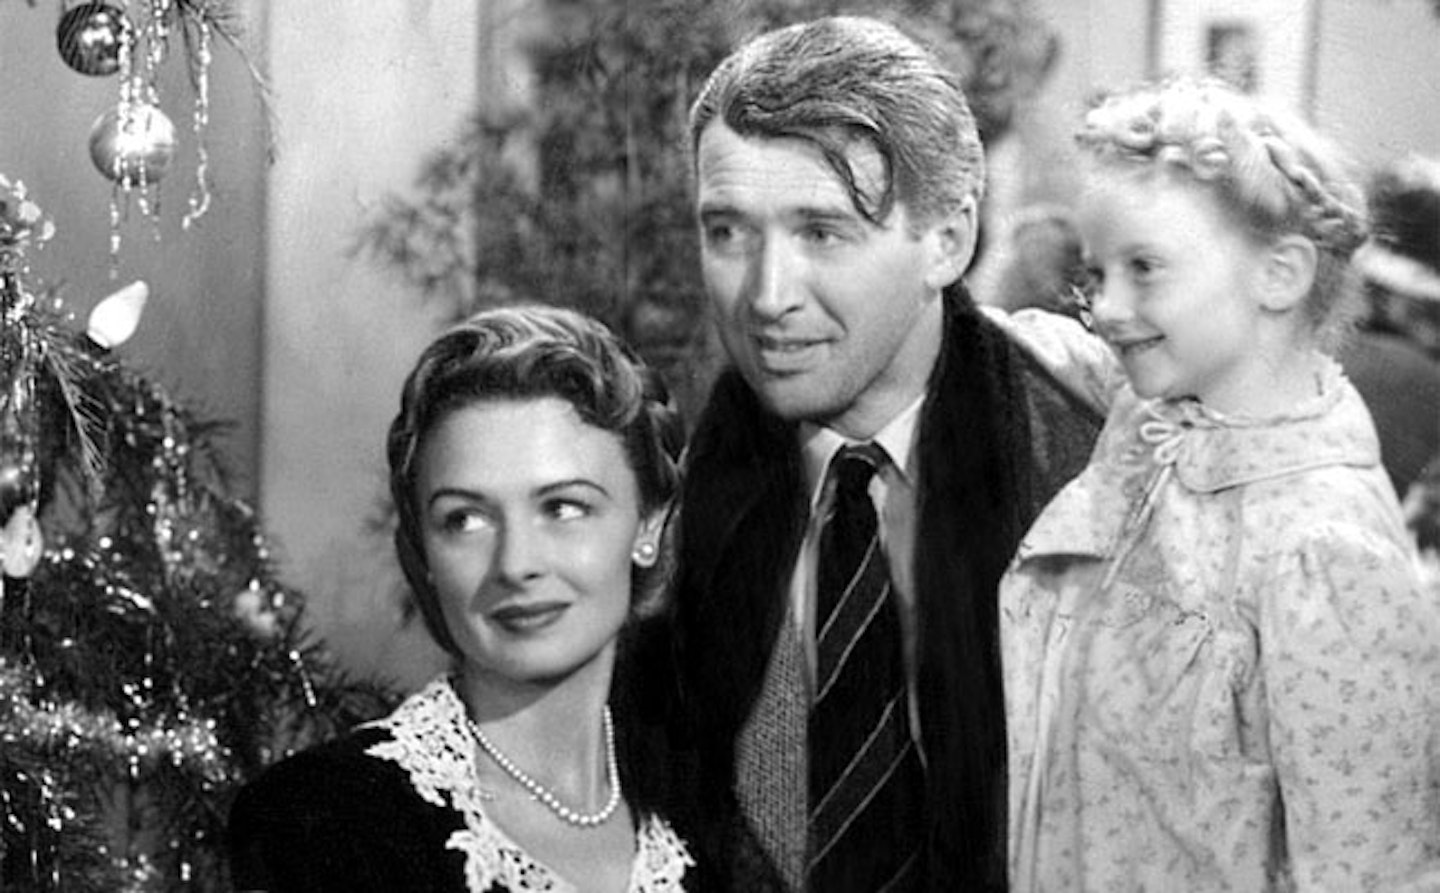 It's A Wonderful Life Sequel Planned